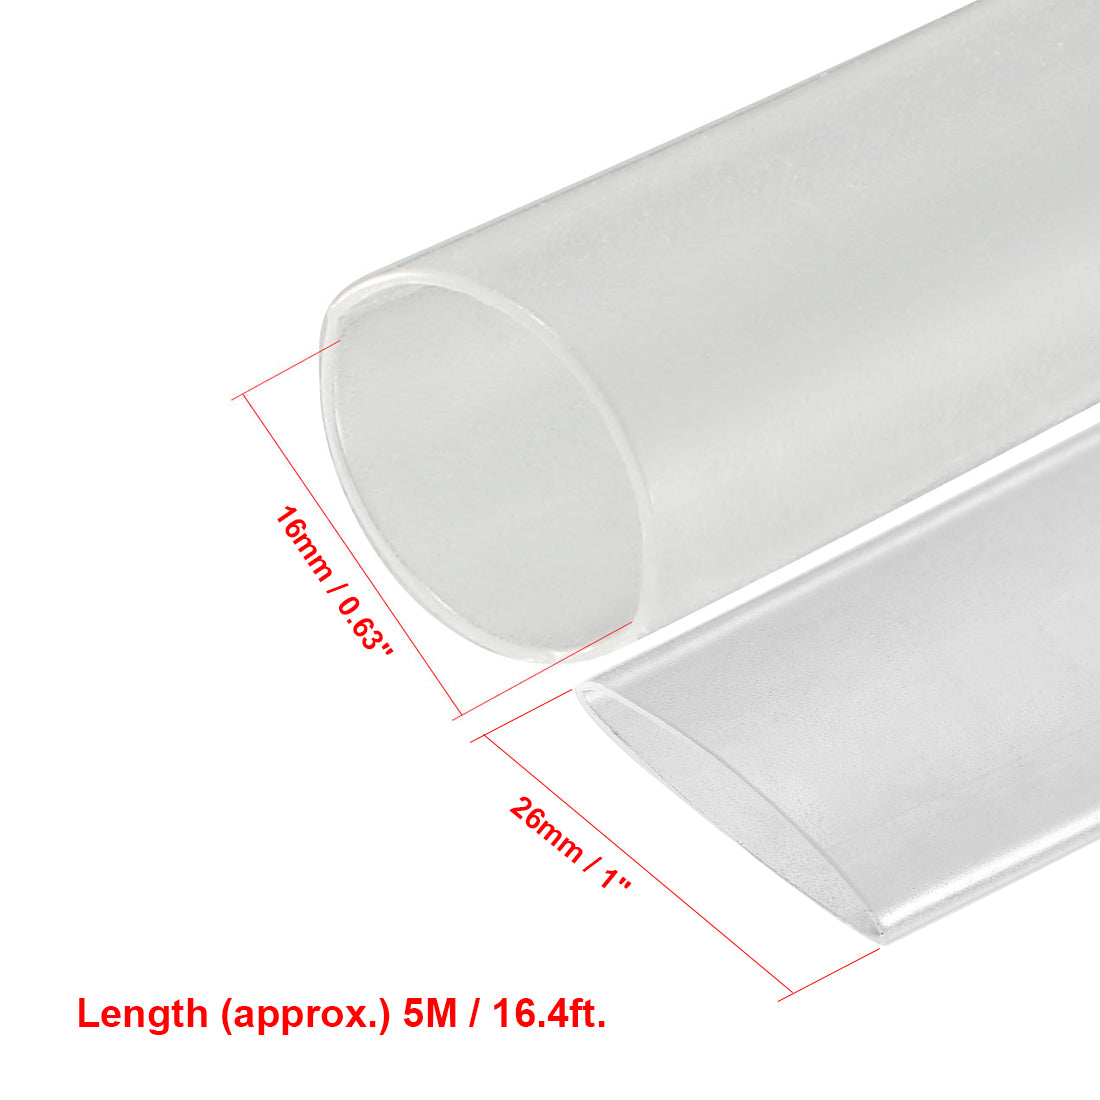 uxcell Uxcell Heat Shrink Tube 2:1 Electrical Insulation Tube Wire Cable Tubing Sleeving Wrap Clear 16mm Diameter 5m Long